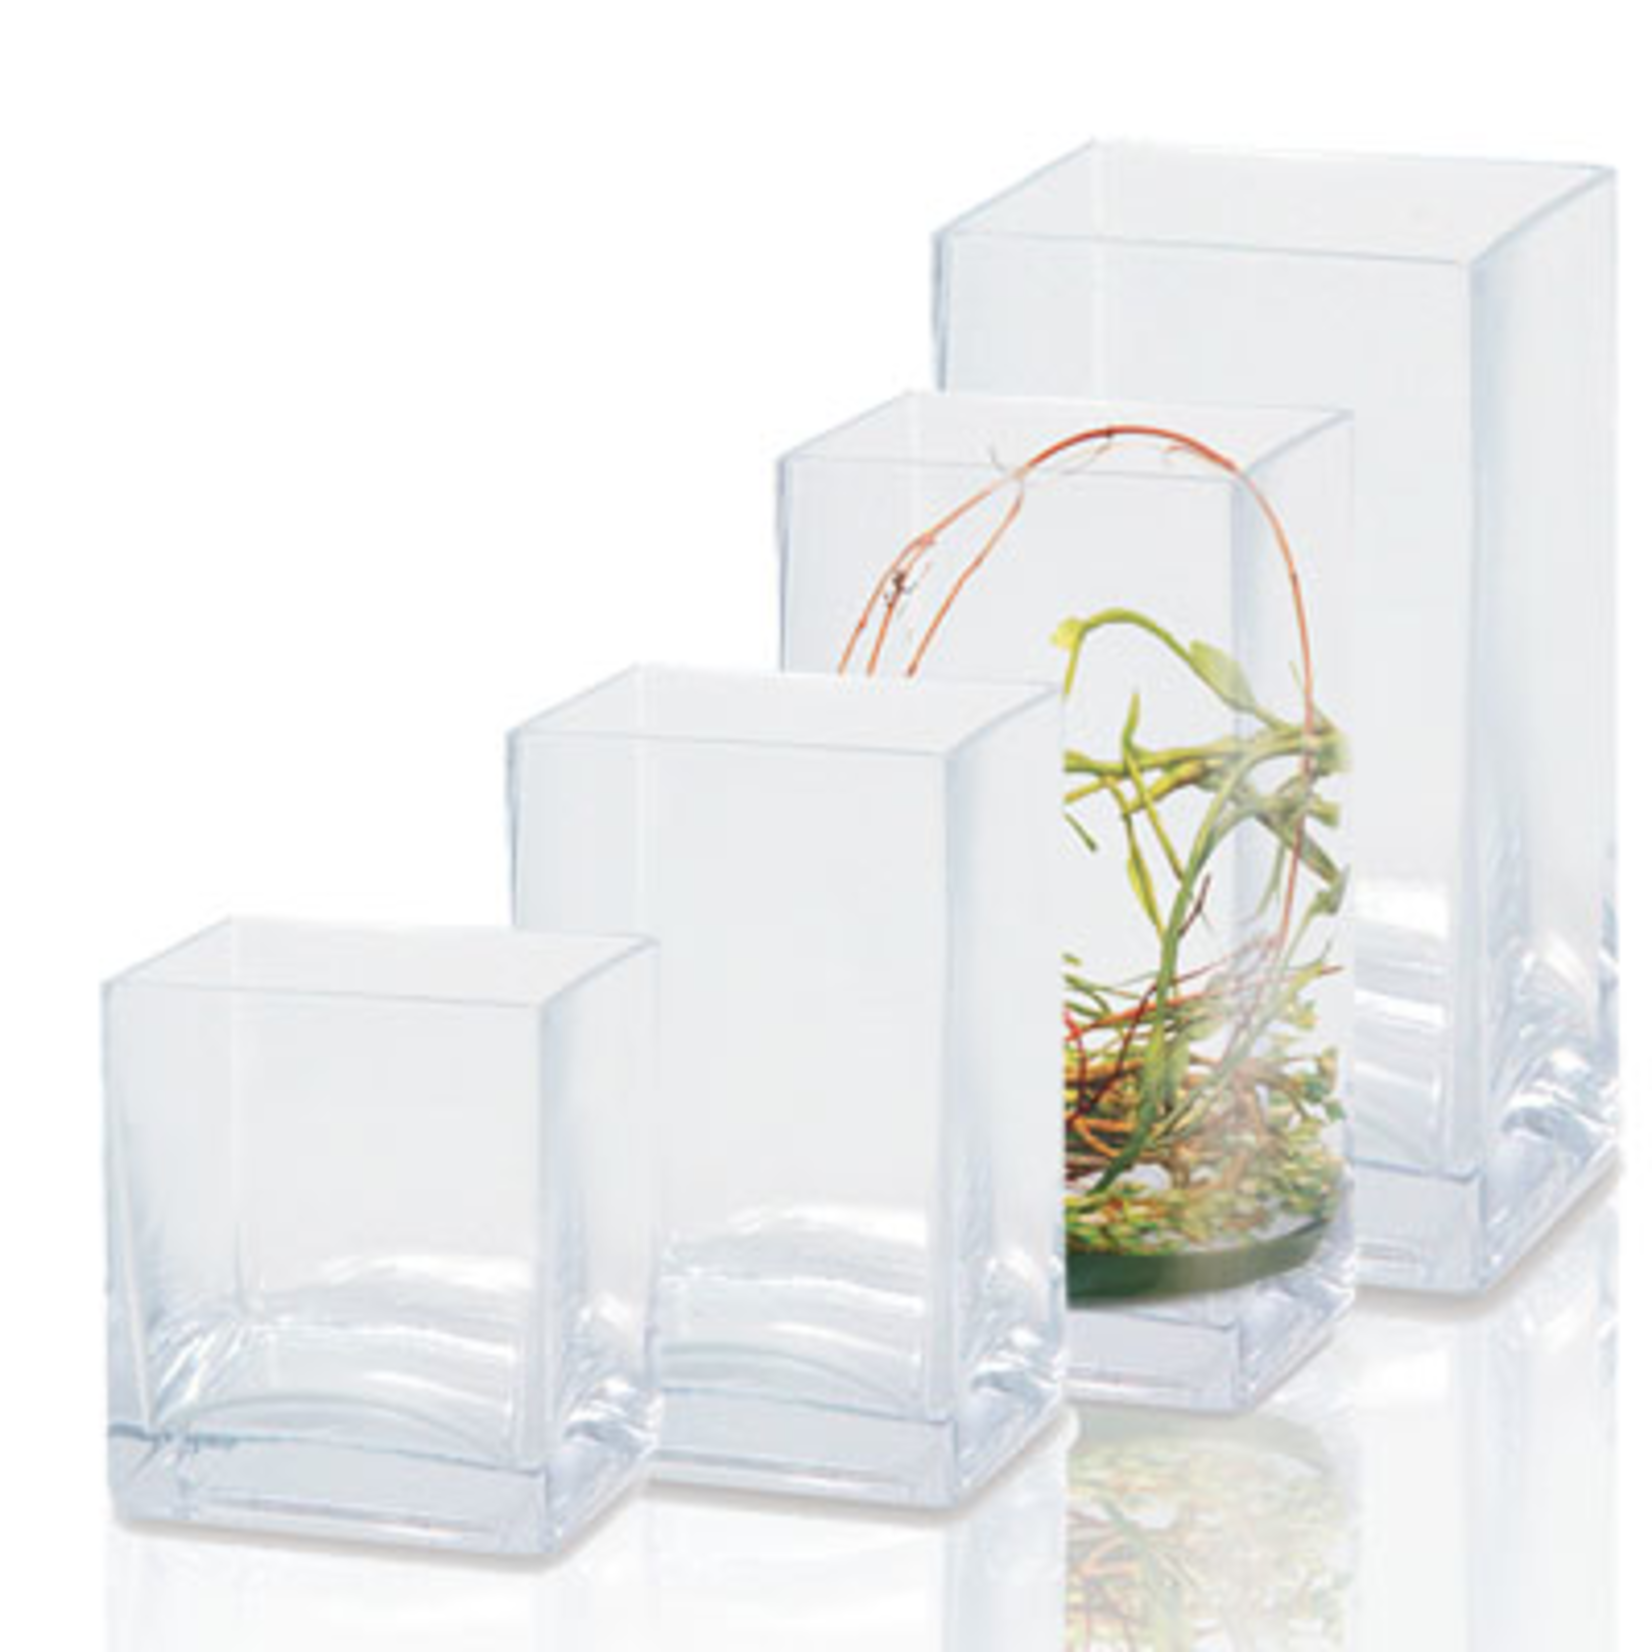 8"H X 6" X 4" CLEAR GLASS RECTANGLE CASE